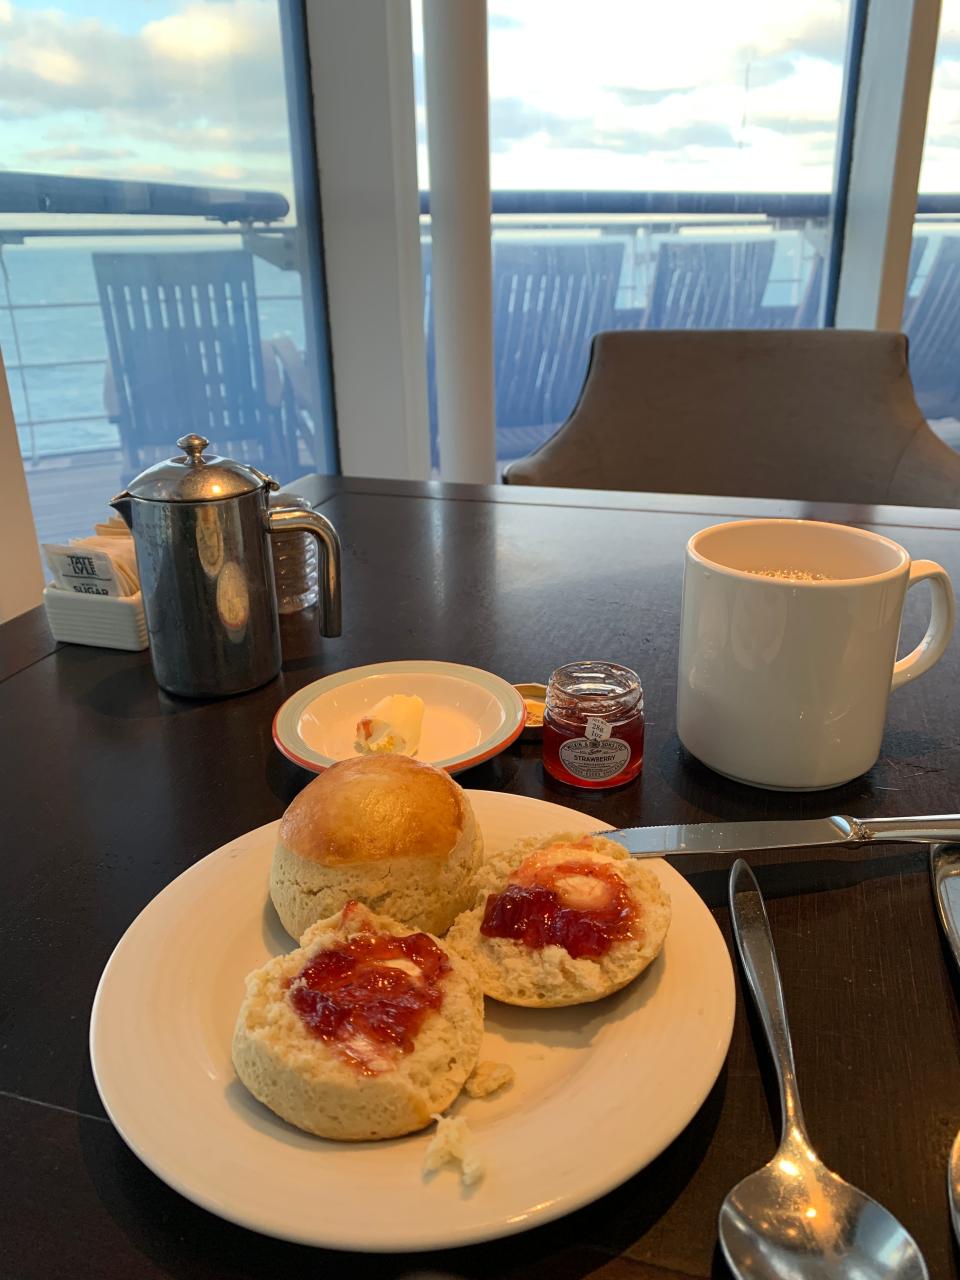 Tea and scones with clotted cream and strawberry jam on board the Queen Mary 2. Tea is served at 3:30 each afternoon.